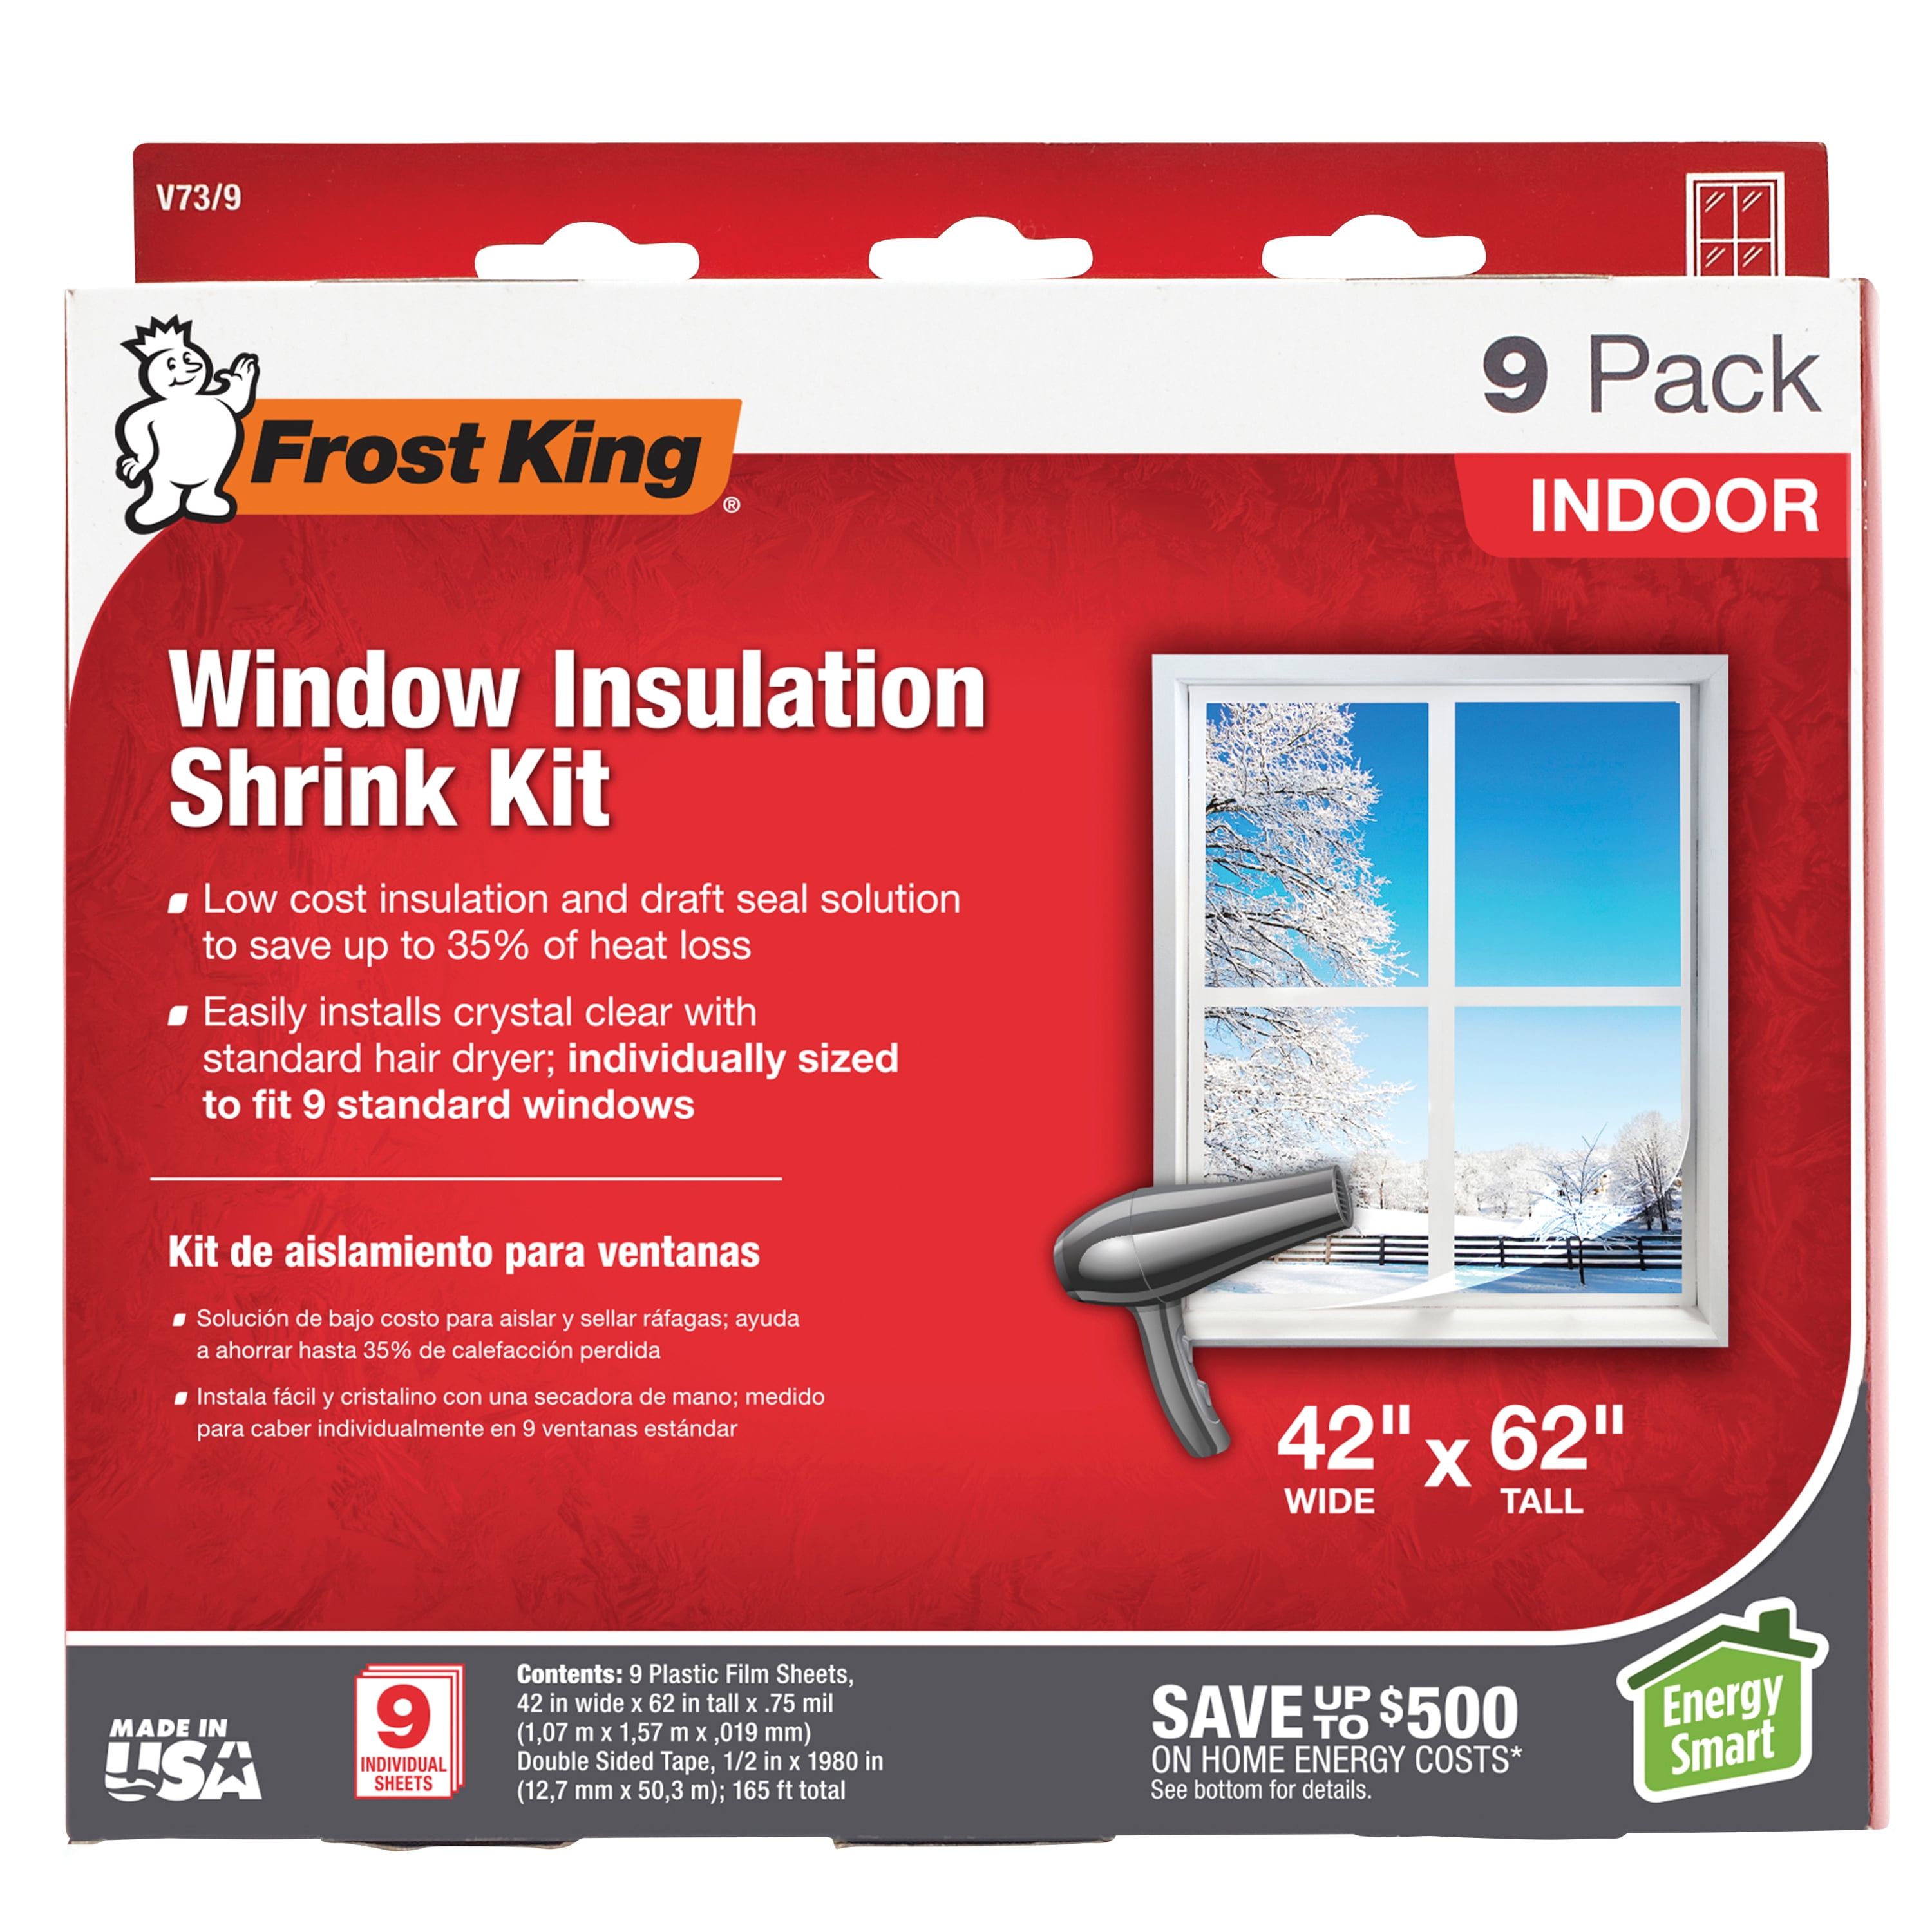 Frost King window insulation 3 pack 42"x62" EXTRA STRENGTH Winterize Kit 